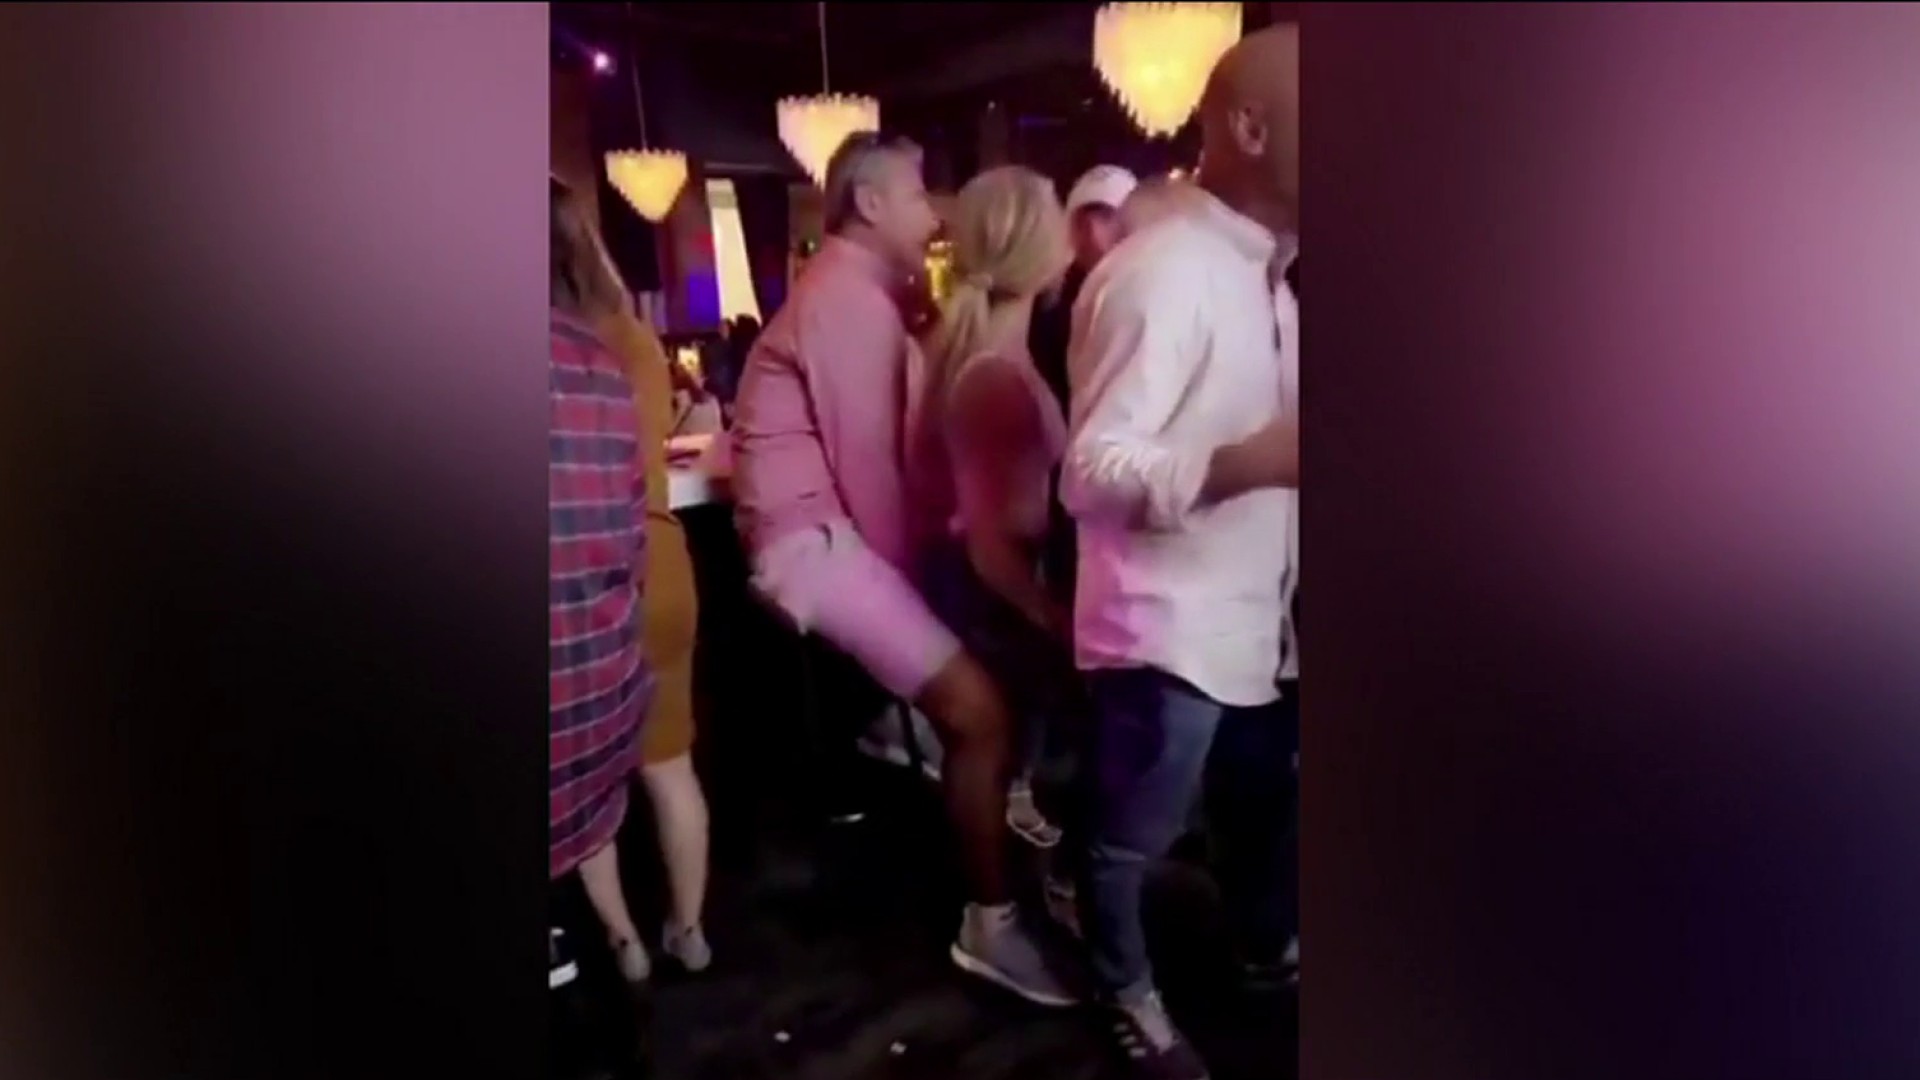 Video purportedly showing Urban Meyer out at bar goes viral picture